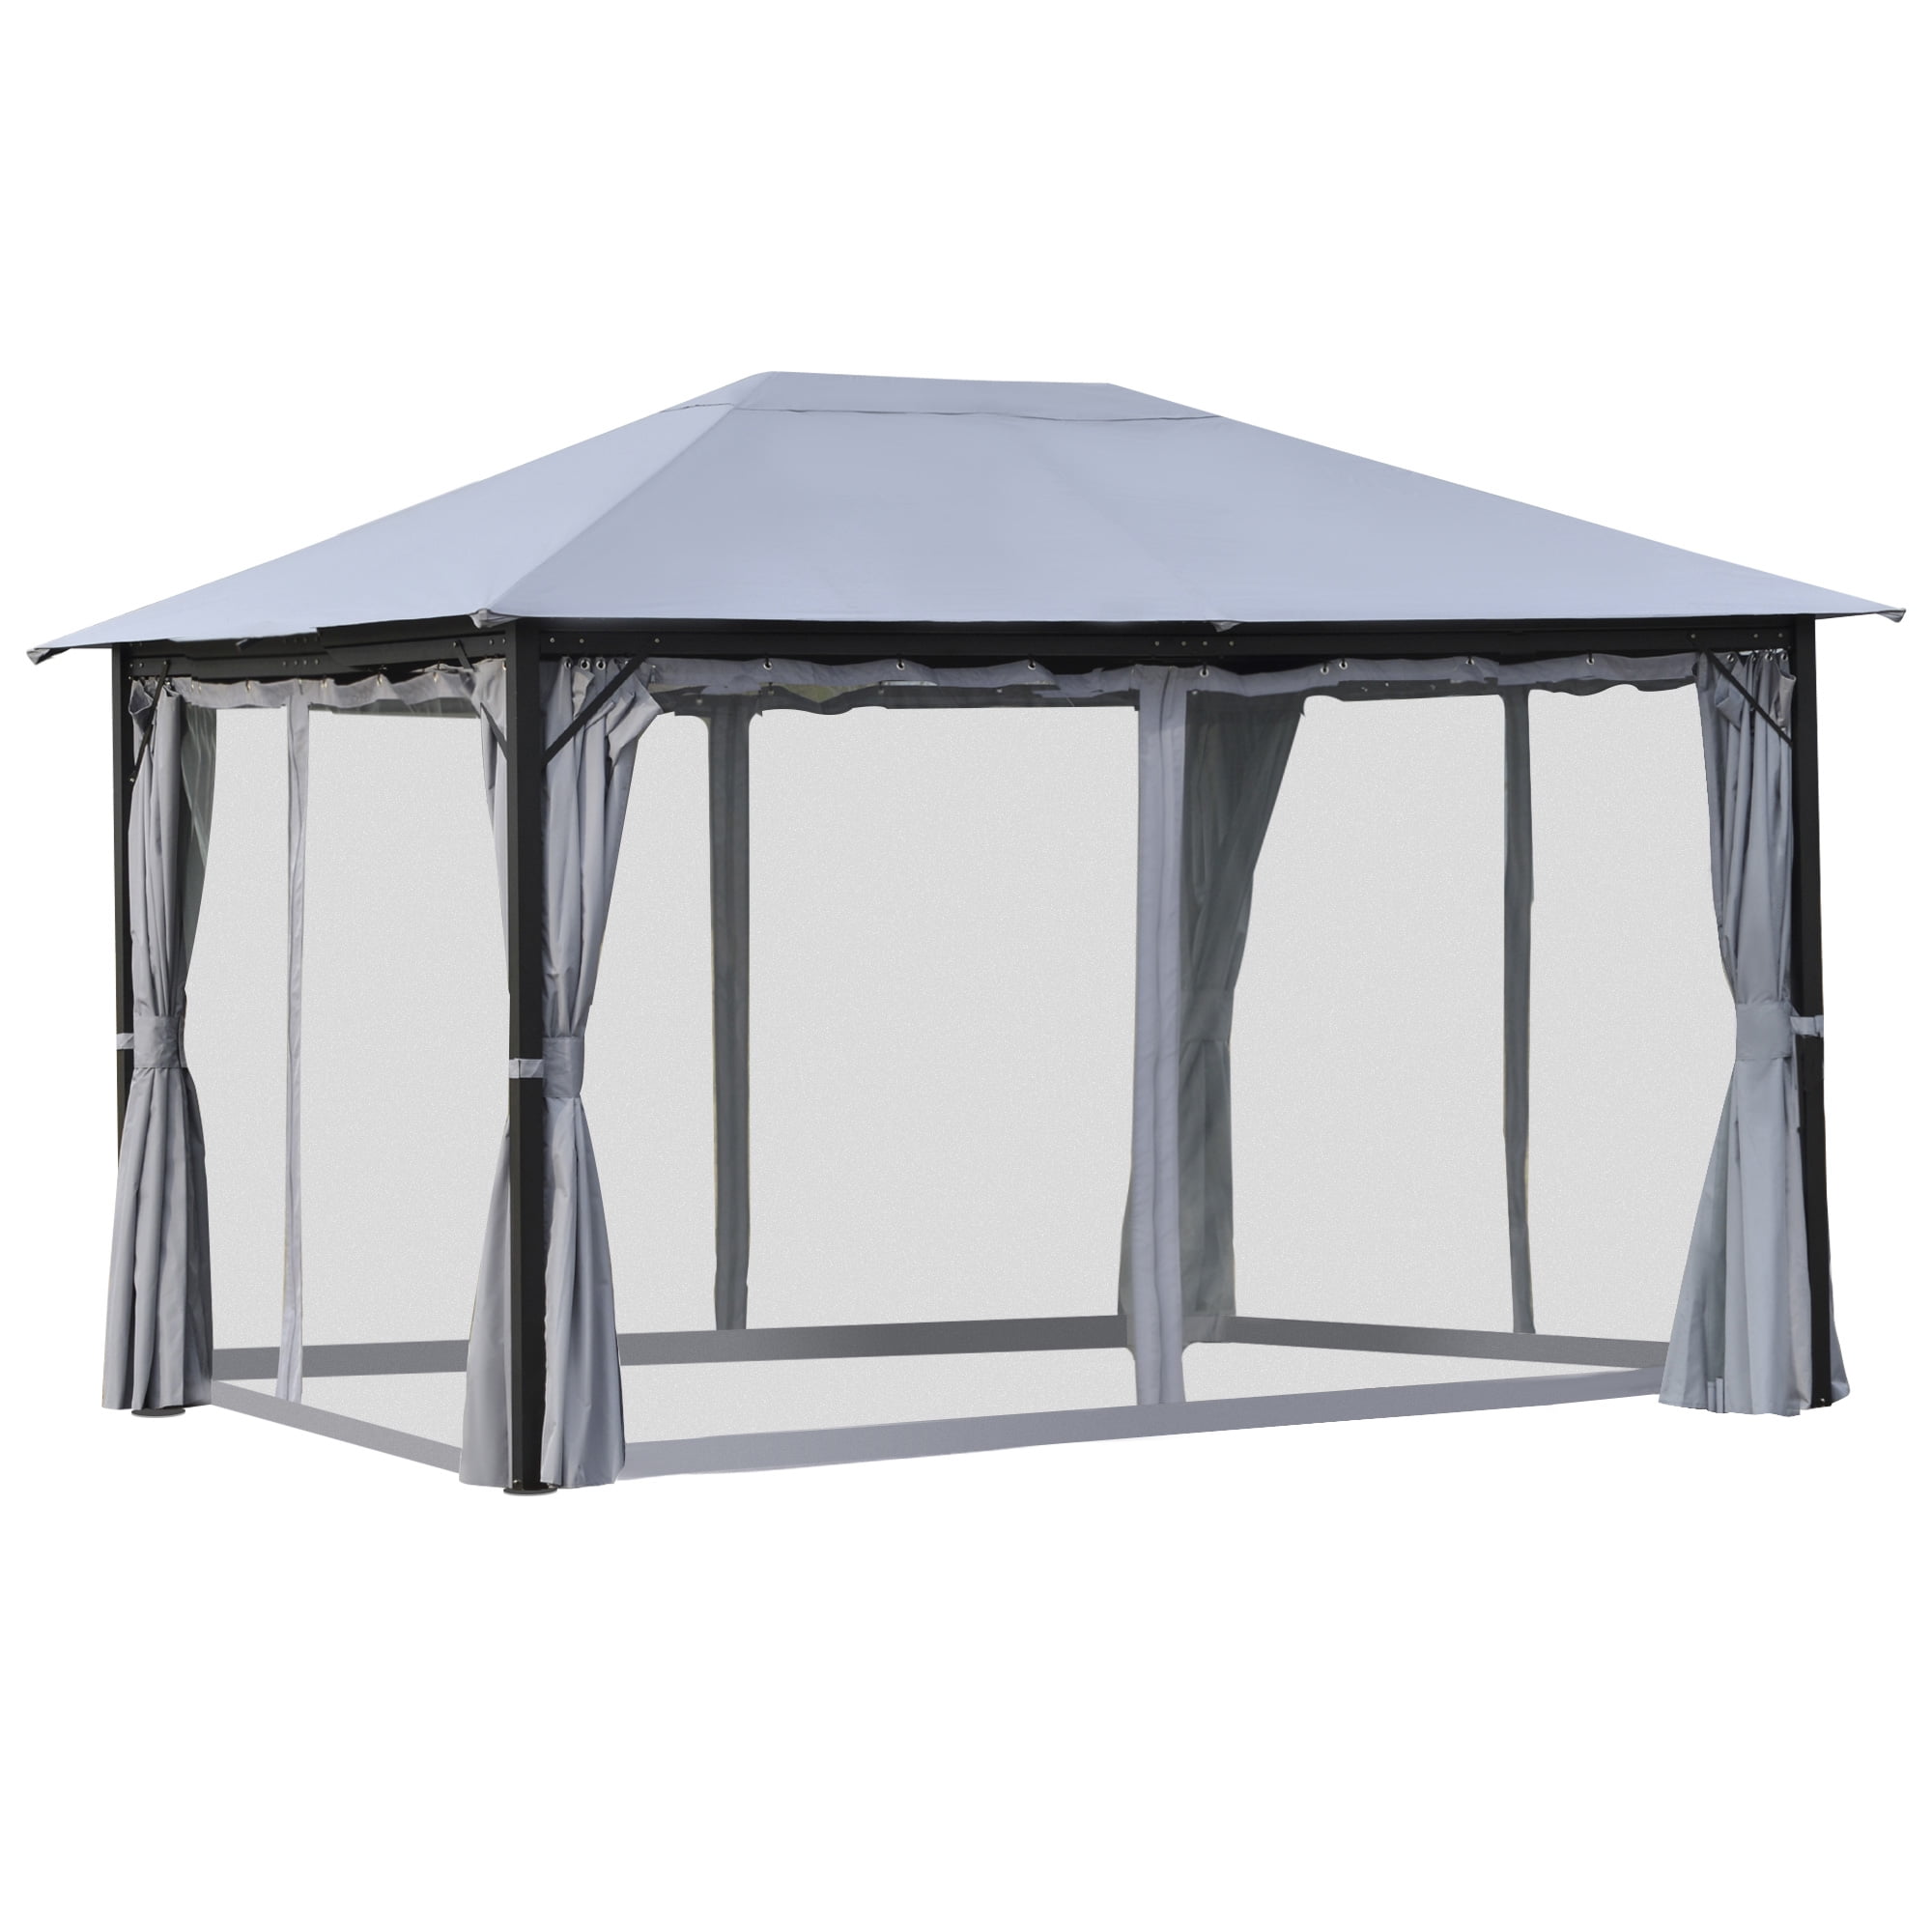 Outsunny 13' x 10' Steel Outdoor Patio Gazebo Pavilion Canopy Tent with Curtains 